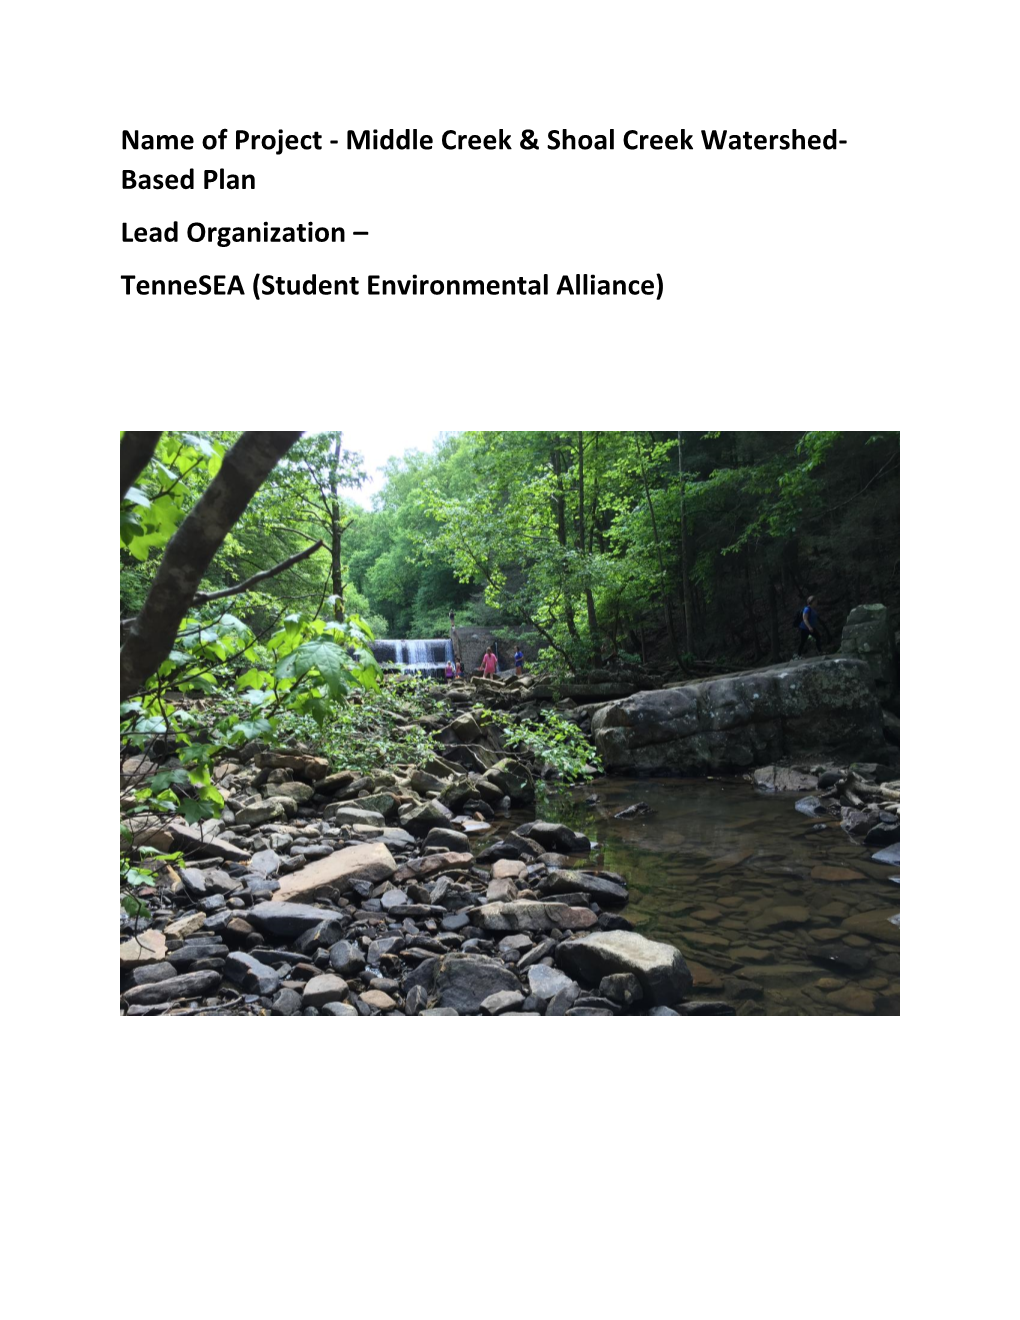 Name of Project - Middle Creek & Shoal Creek Watershed- Based Plan Lead Organization – Tennesea (Student Environmental Alliance)